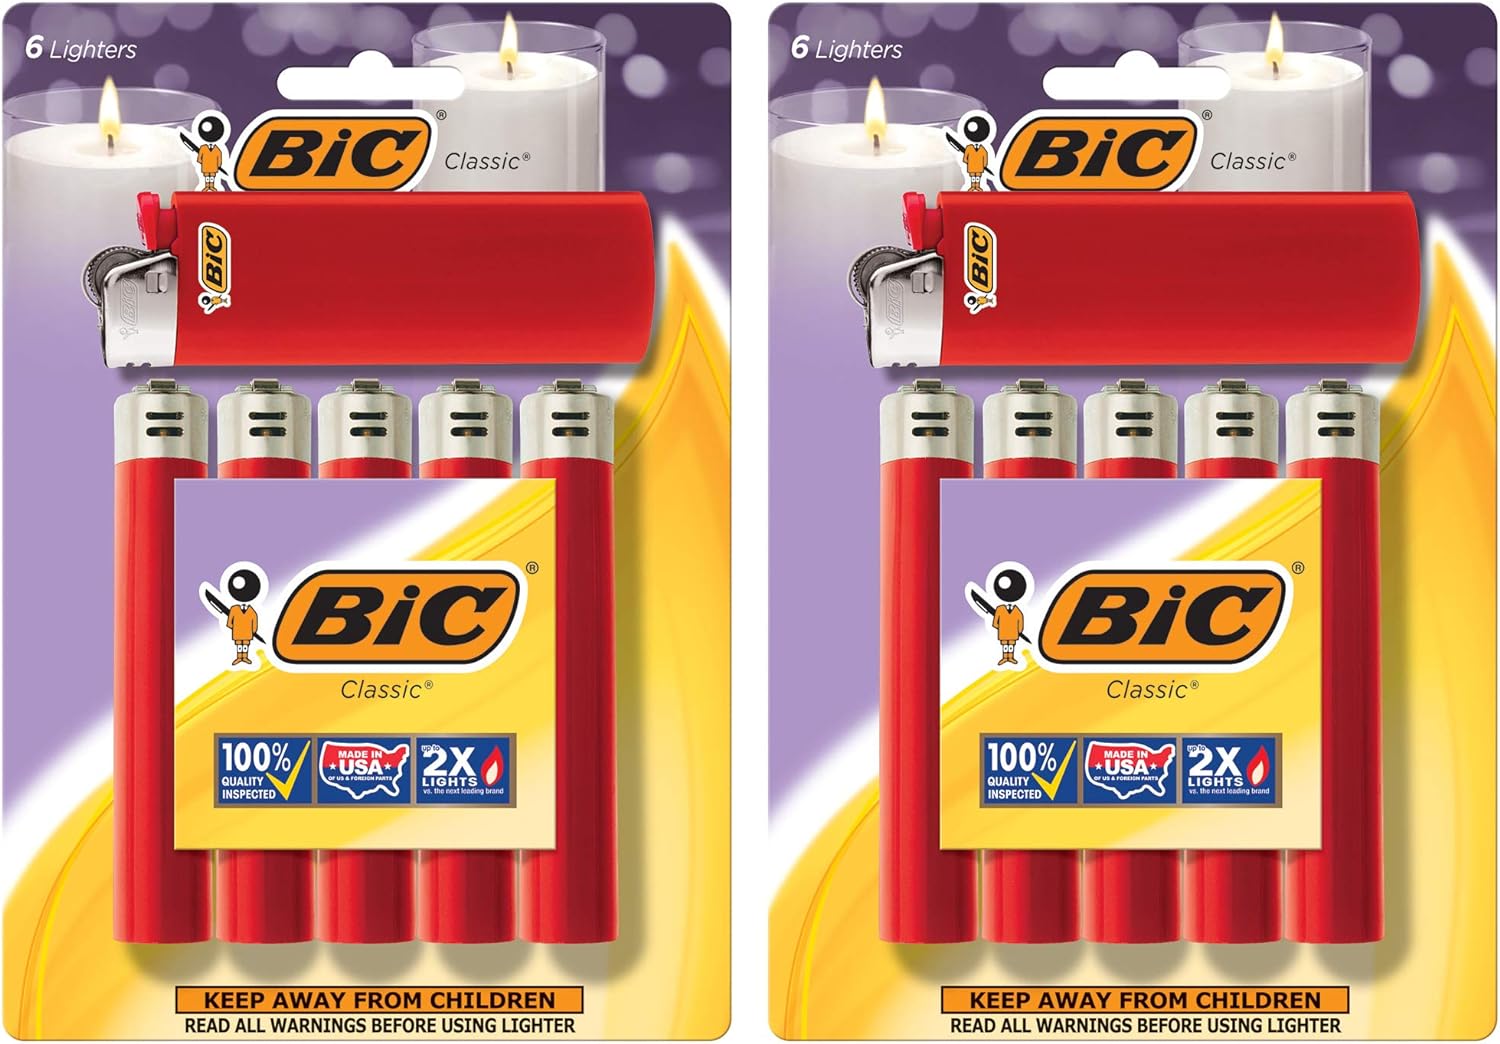 BIC Classic Lighter, Red, 12-Pack (Packaging May Vary)